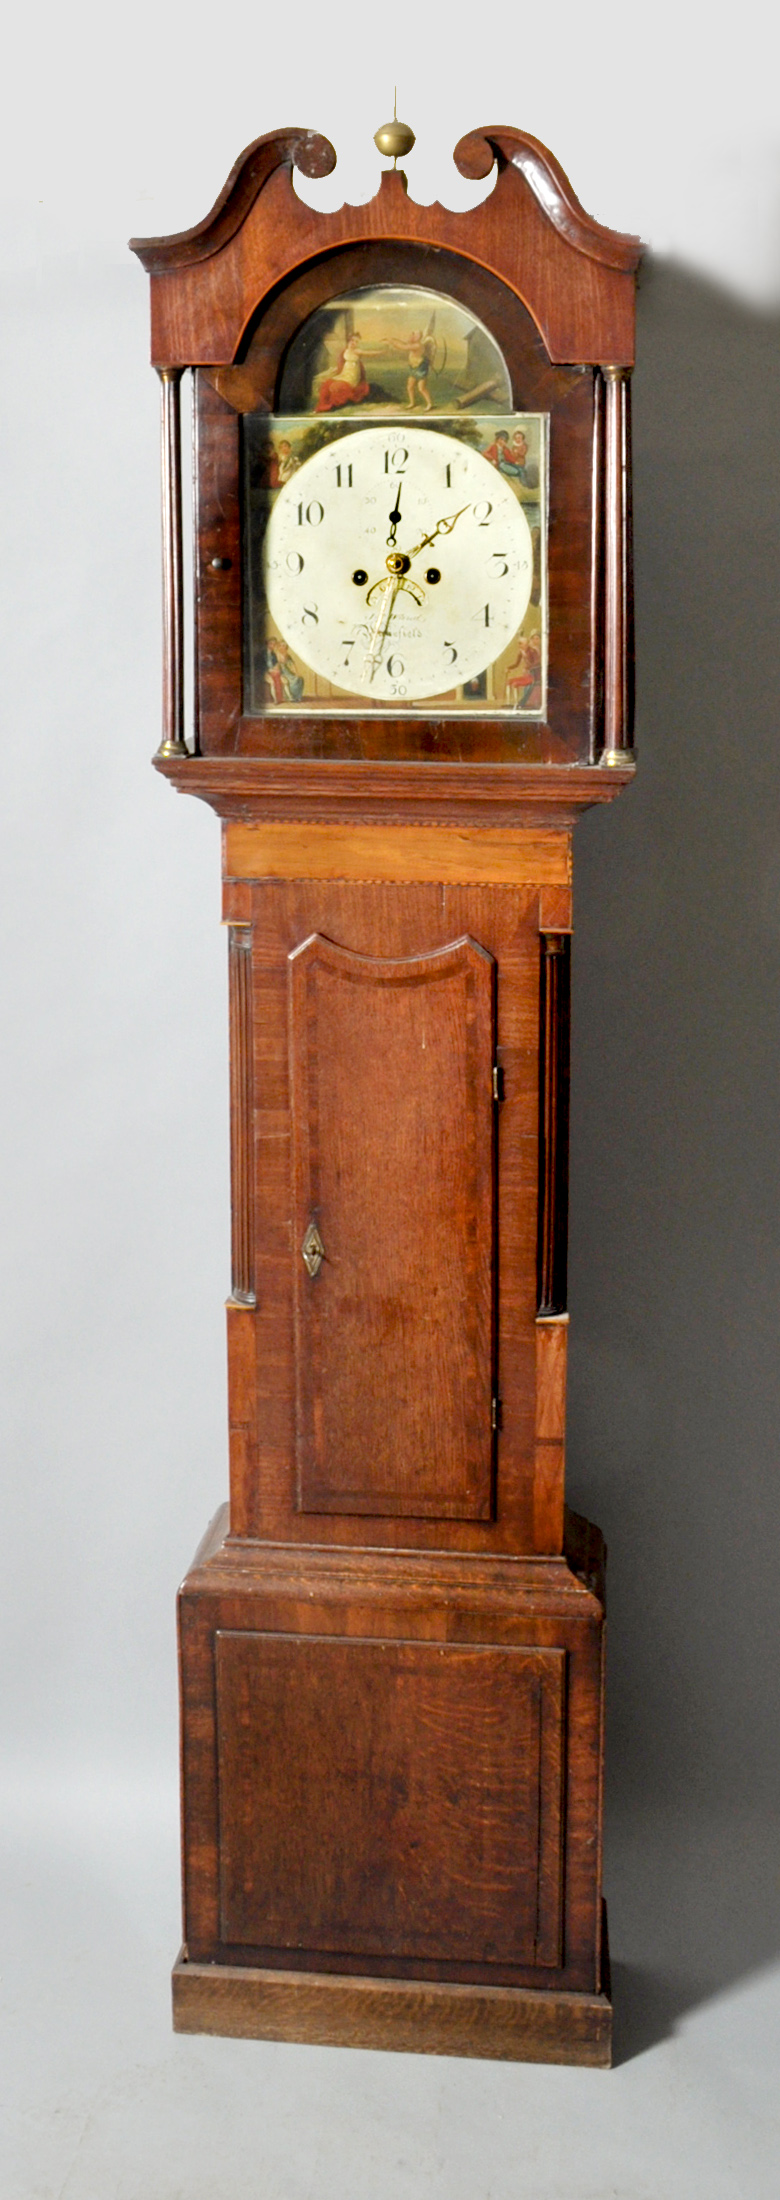 An early 19c eight day longcase clock, the 13"" arched painted dial signed John Wand, Wakefield and